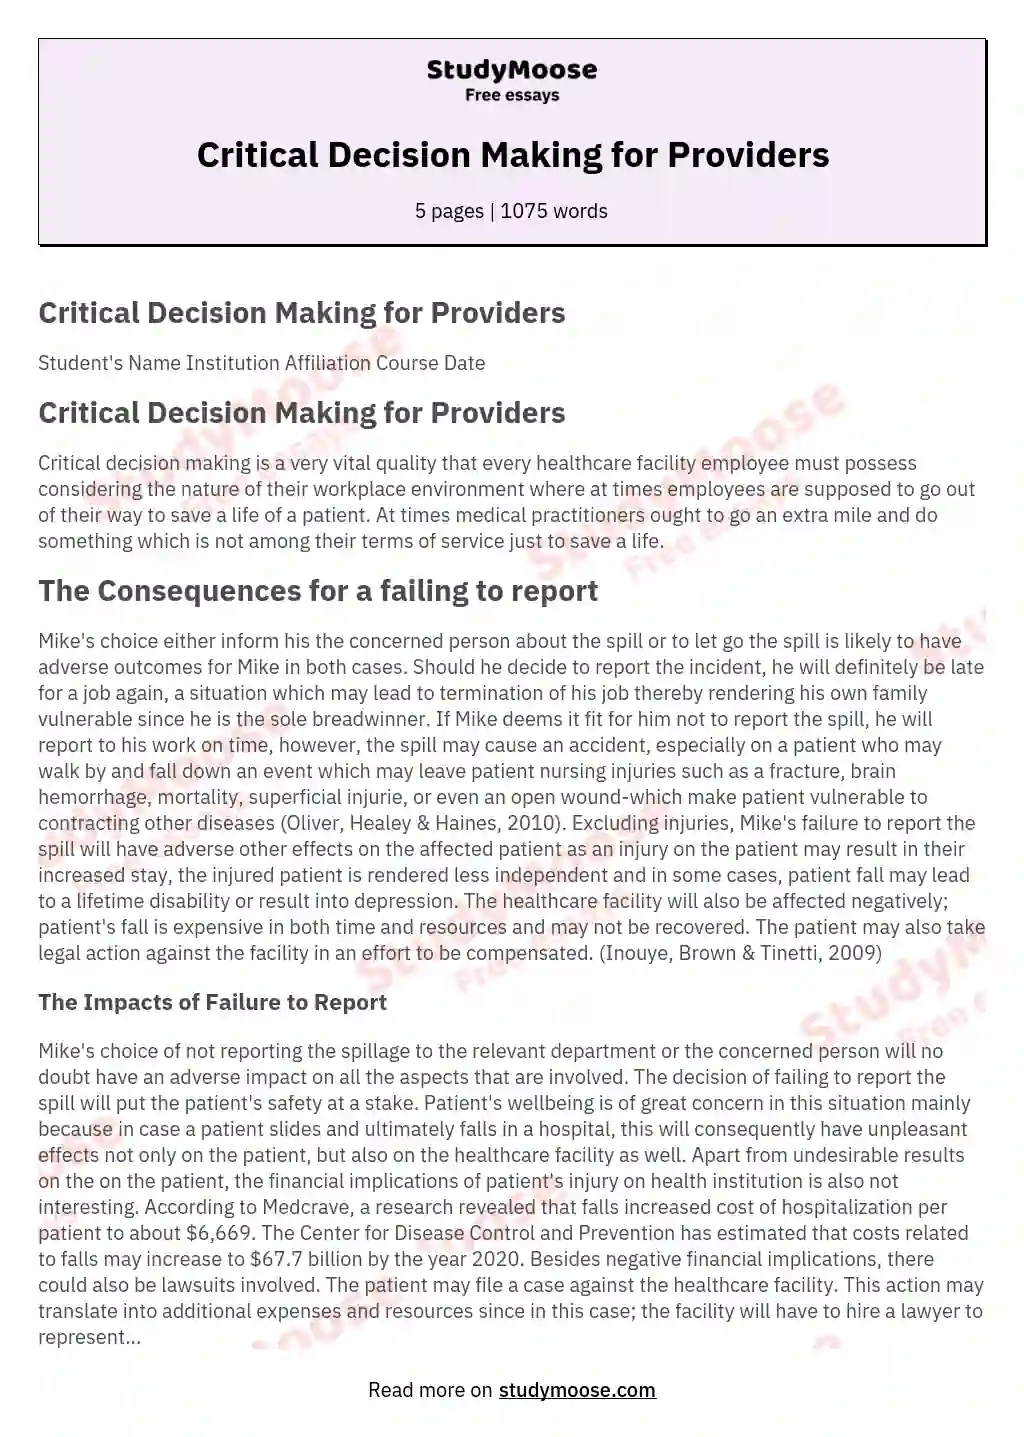 Critical Decision Making for Providers essay